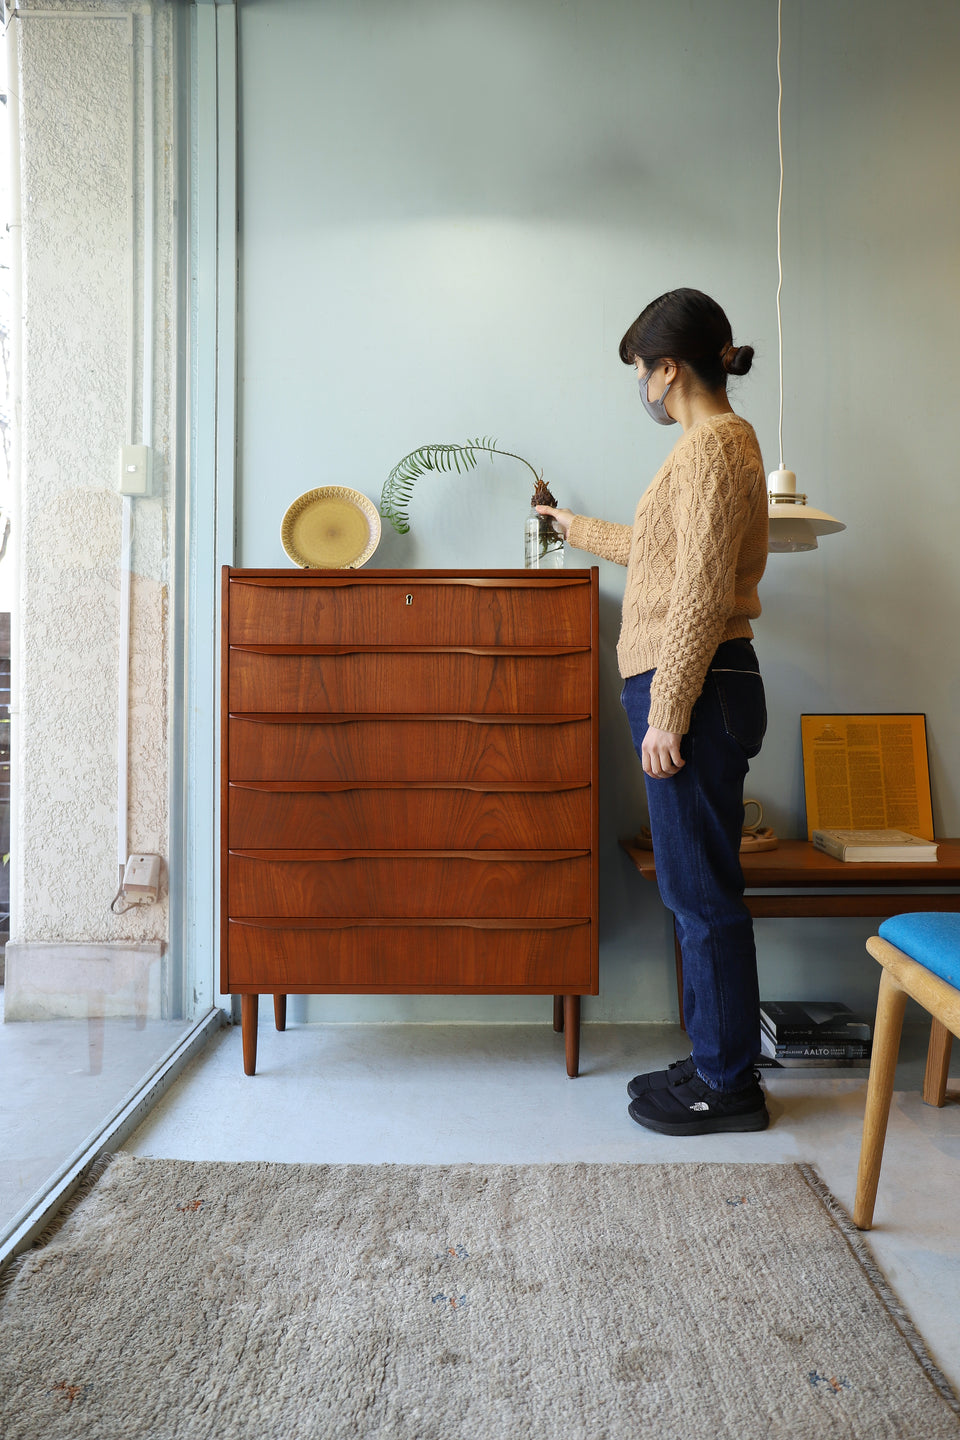 6Drawer High Chest Danish Vintage/デンマークヴィンテージ ハイチェスト 6段 北欧家具 チーク材